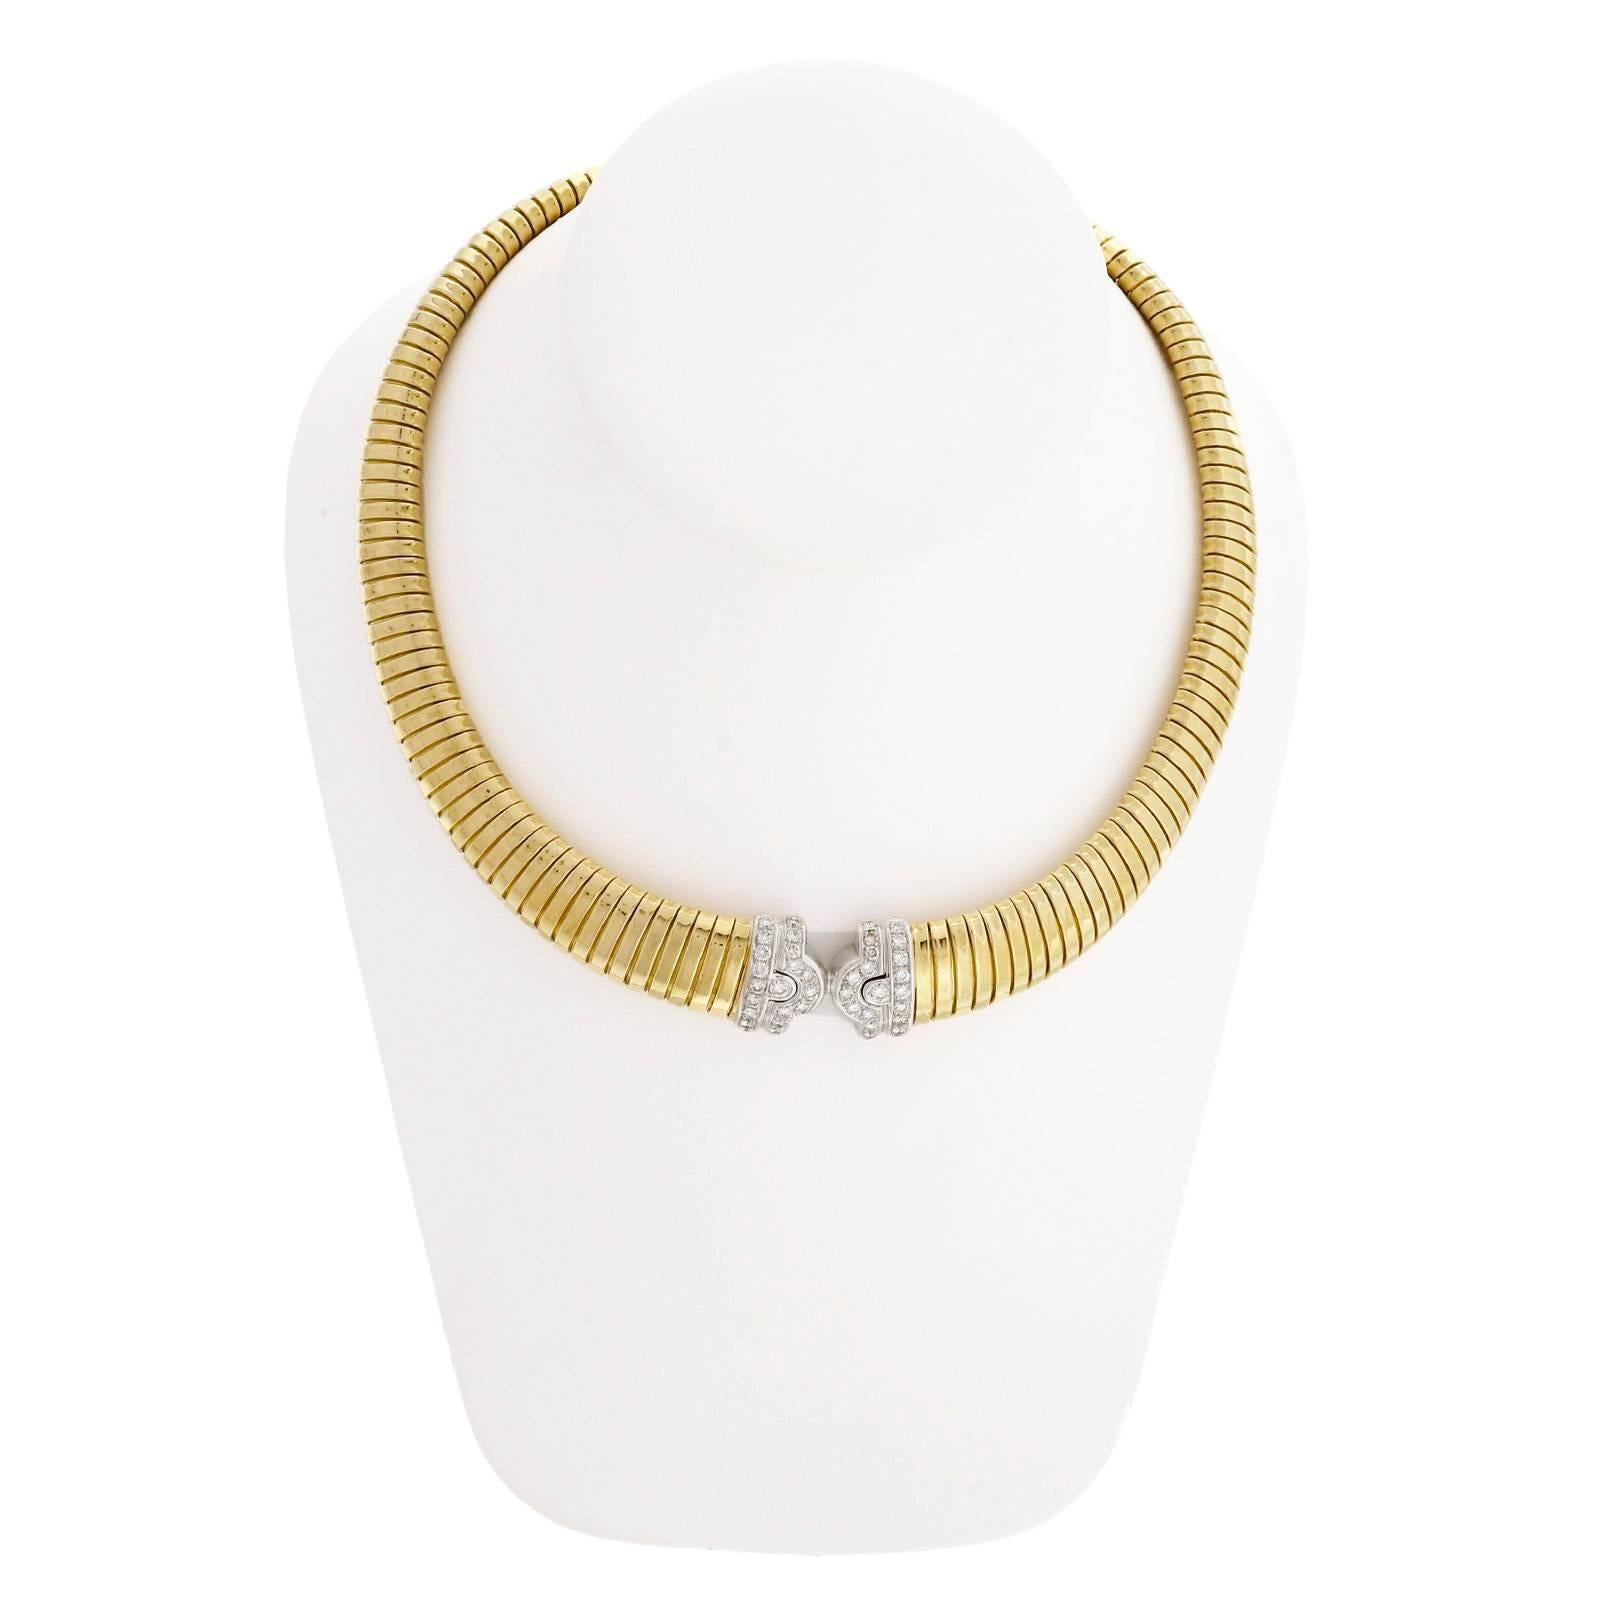 Vintage 1970-1980 solid 18k gold Tubogas necklace with white gold center section. Nice 17 inch length. One small dent on the back to the left of the diamond section. No dents or other marks on the front.

38 round diamonds, approx. total weight